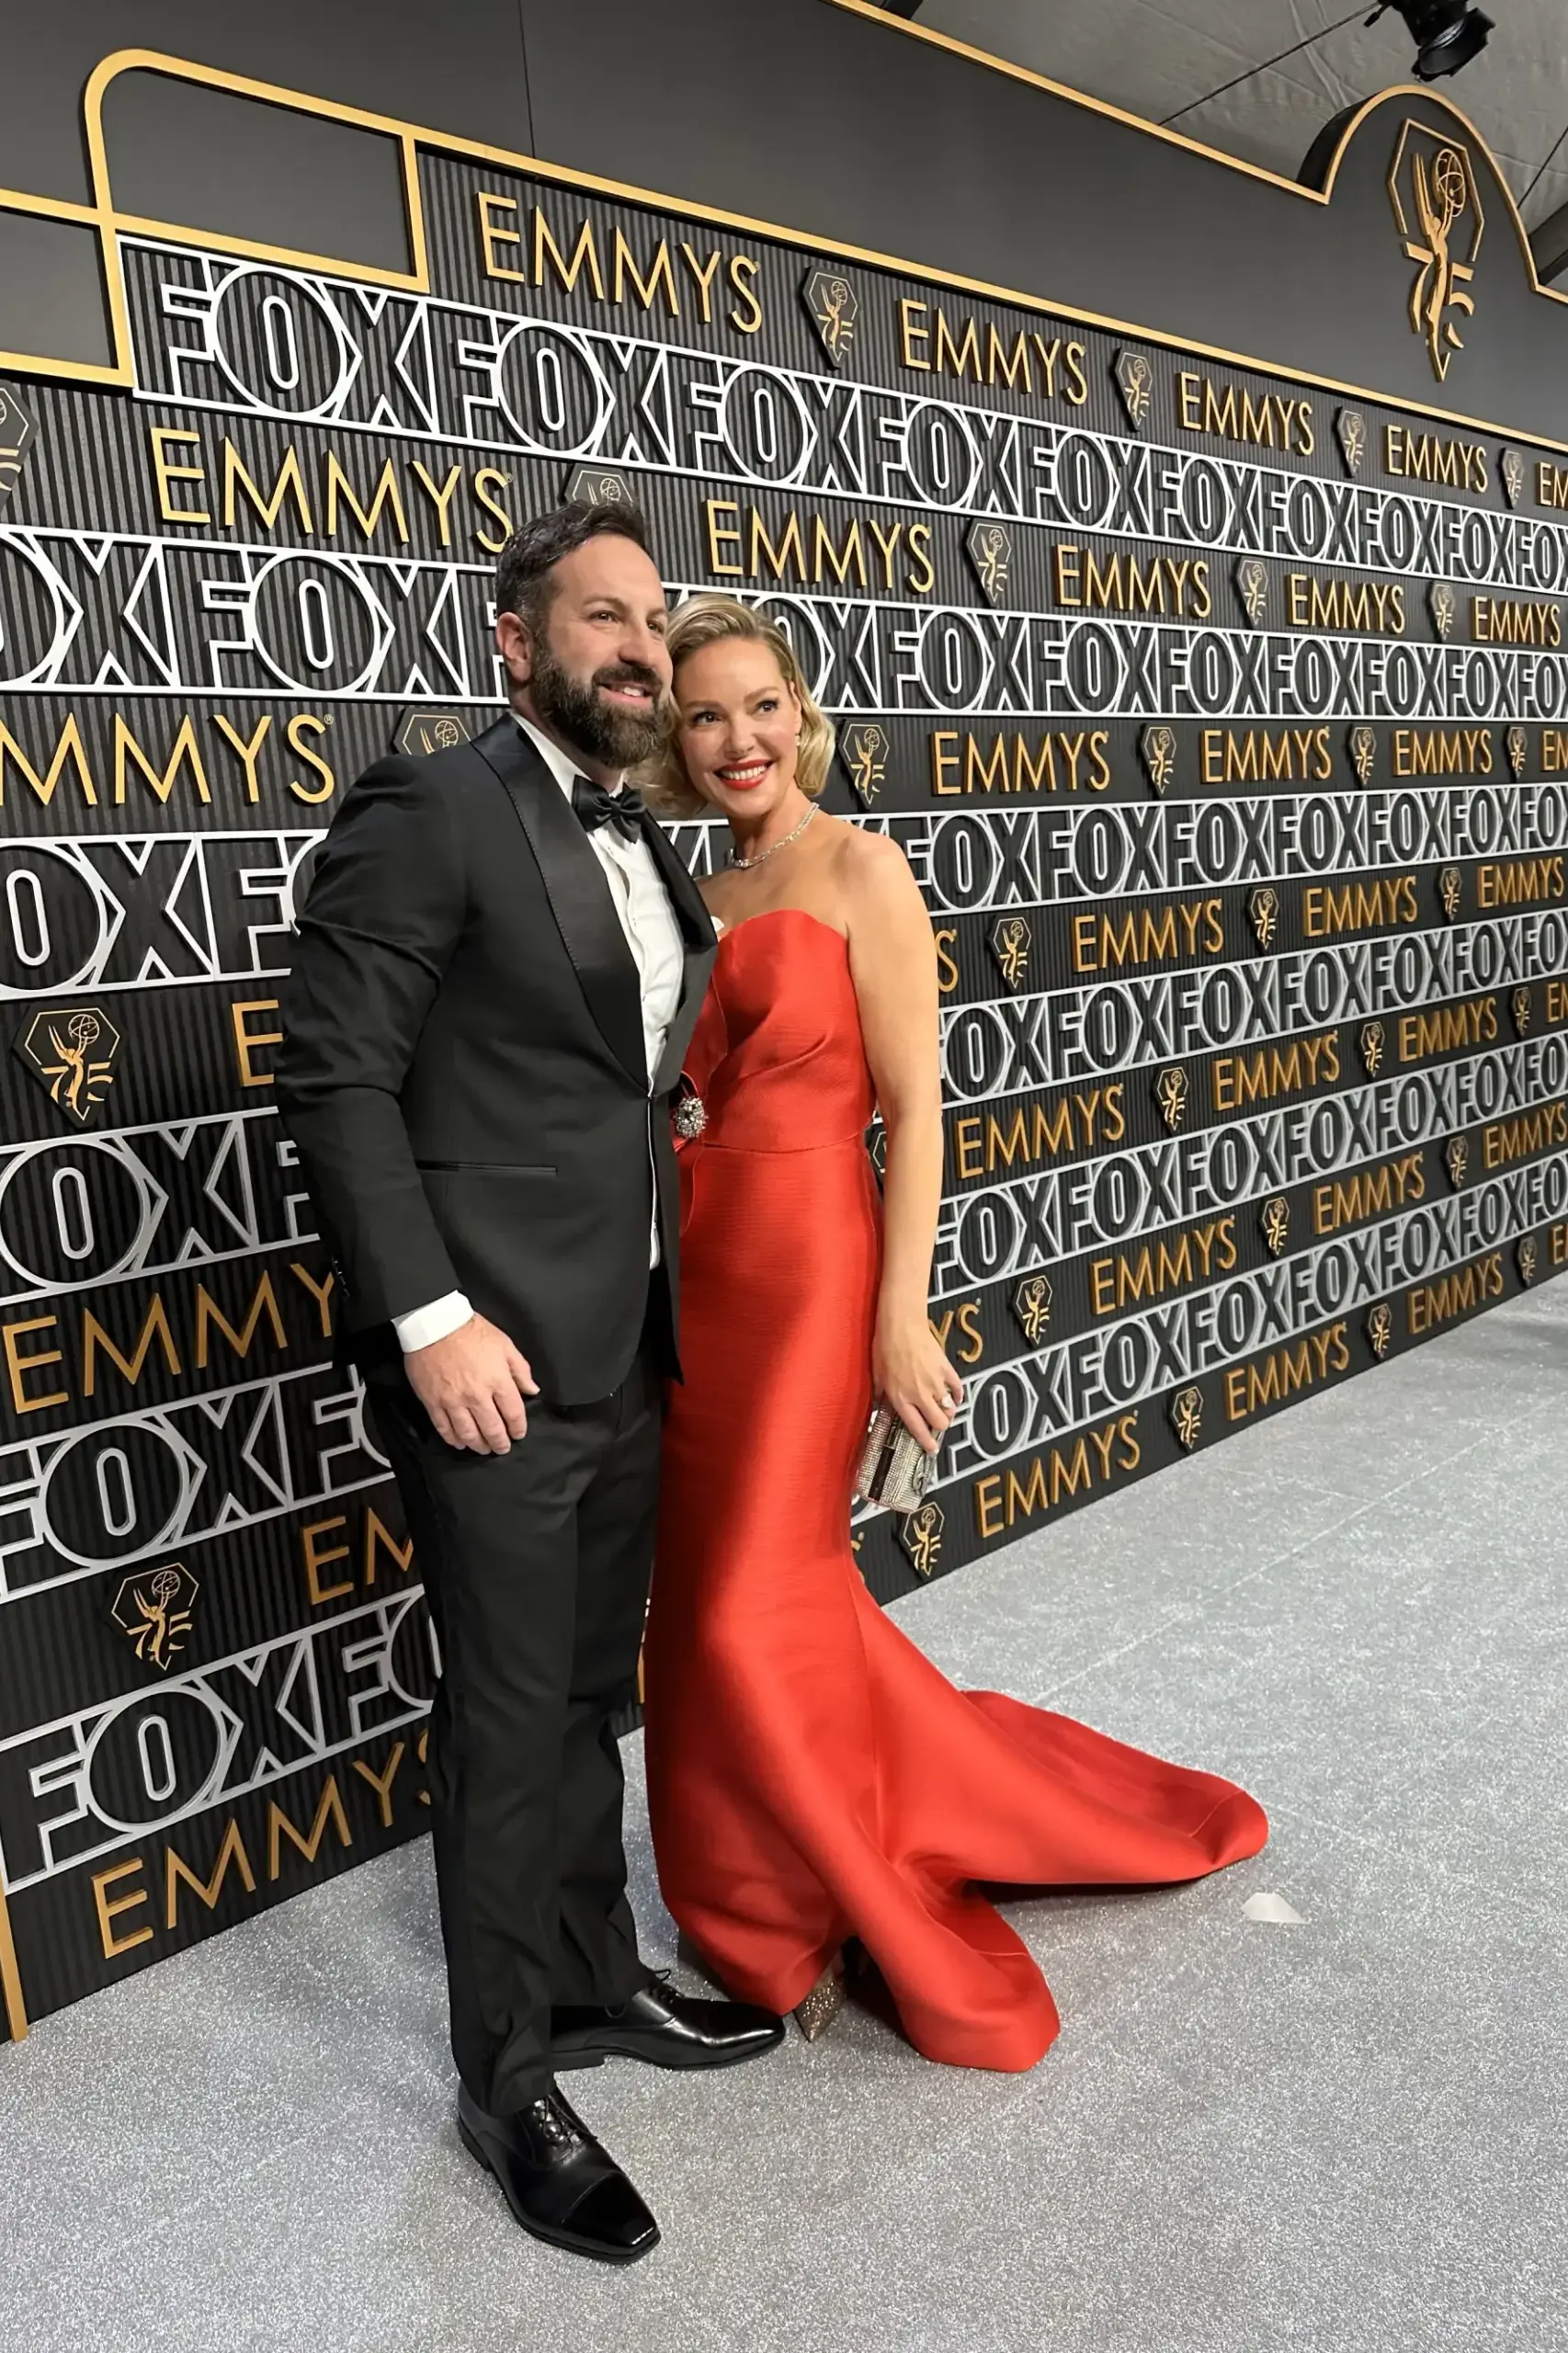 Katherine Heigl and husband Josh Kelley on the red carpet at the 75th Emmy Awards